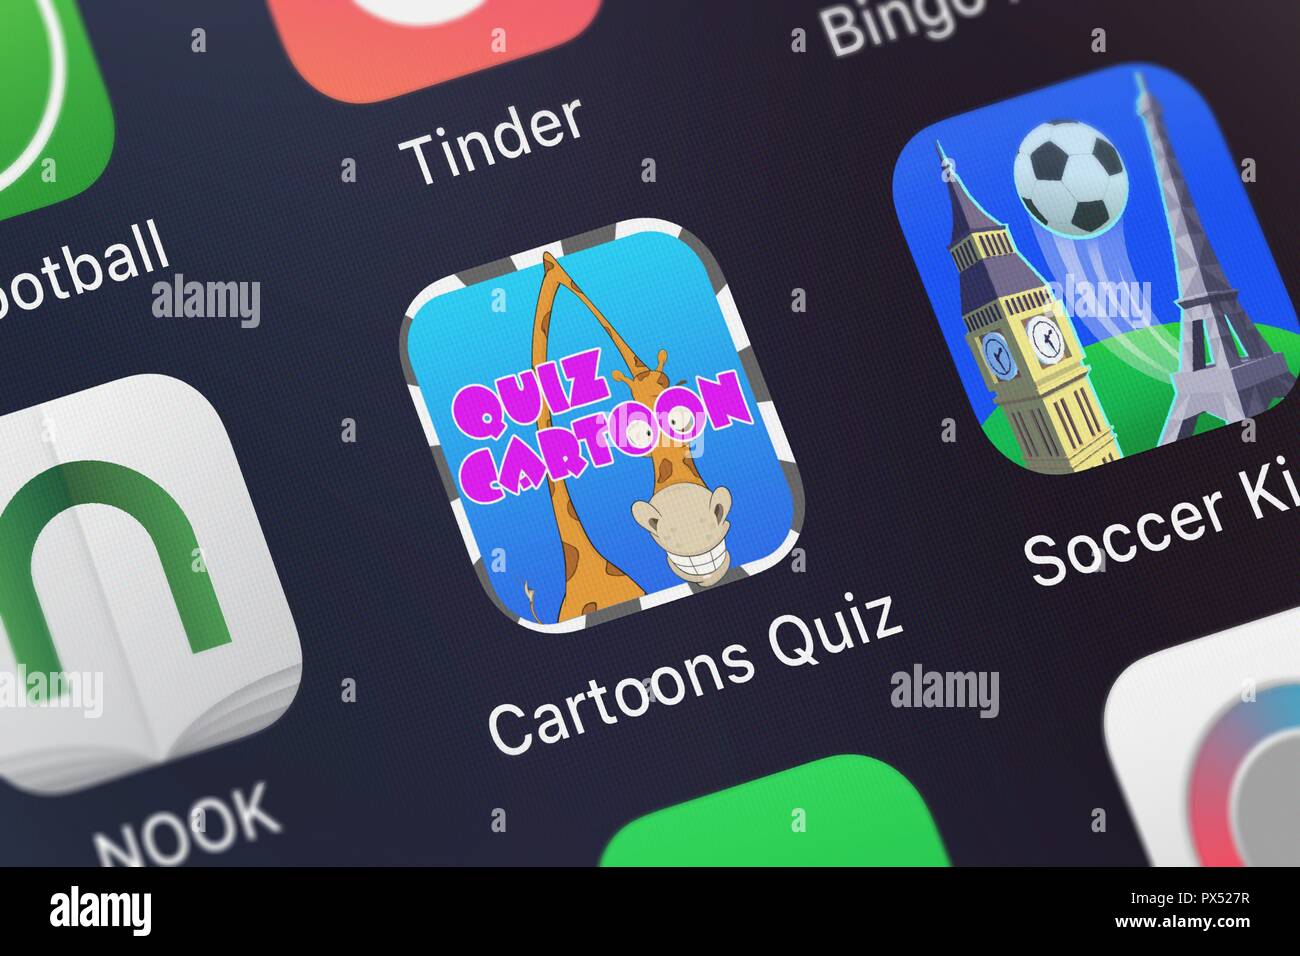 London, United Kingdom - October 19, 2018: Close-up of the Cartoons Quiz -  Trivia of Animation Classic Cartoon-Network Pics icon from App Holdings on  Stock Photo - Alamy